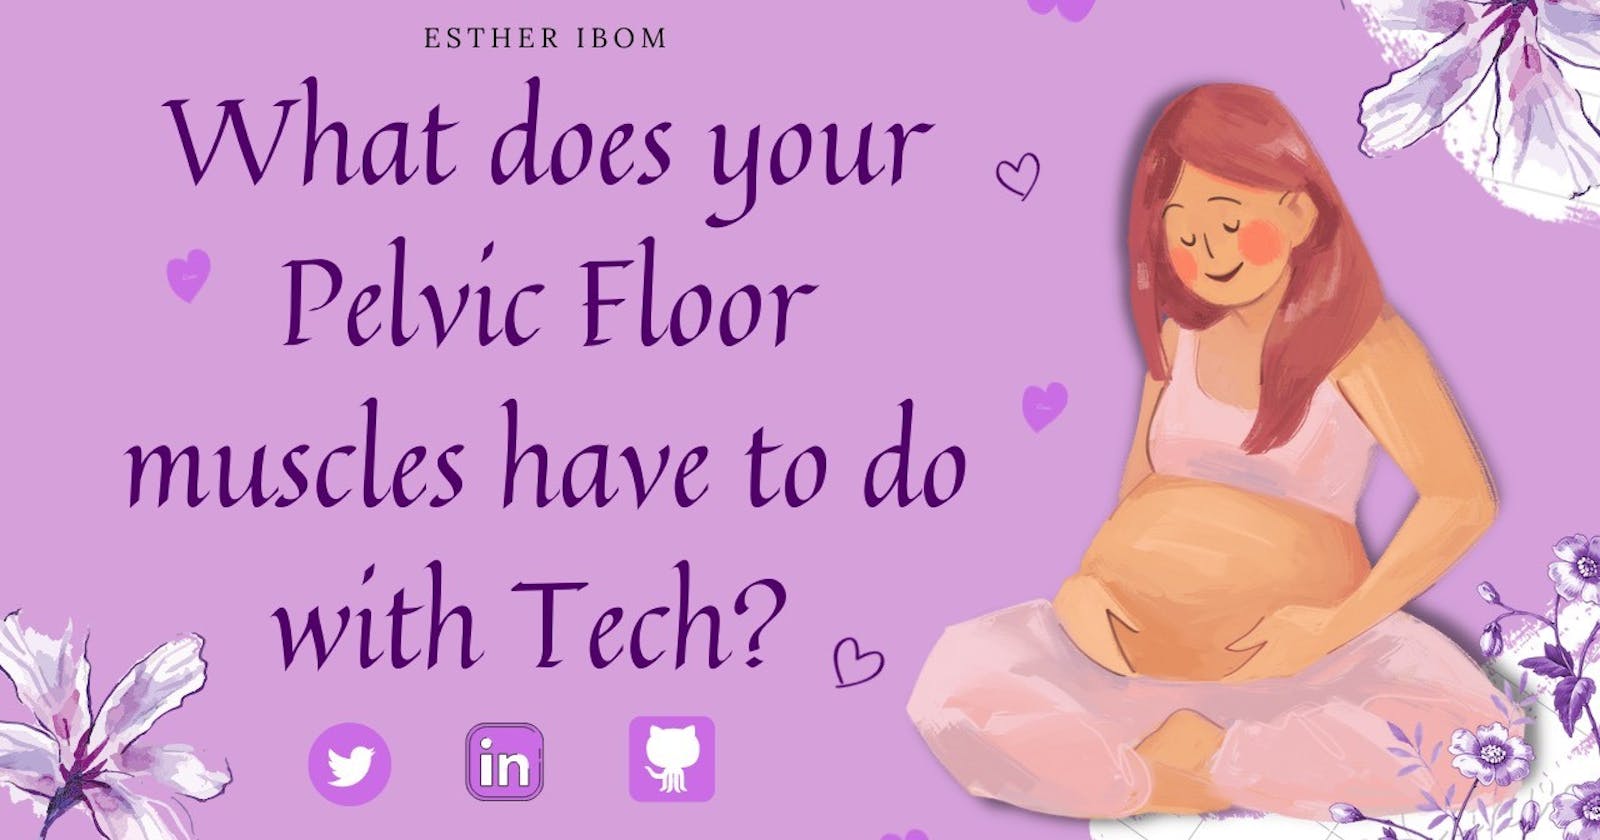 What does your Pelvic Floor muscles have to do with Tech?